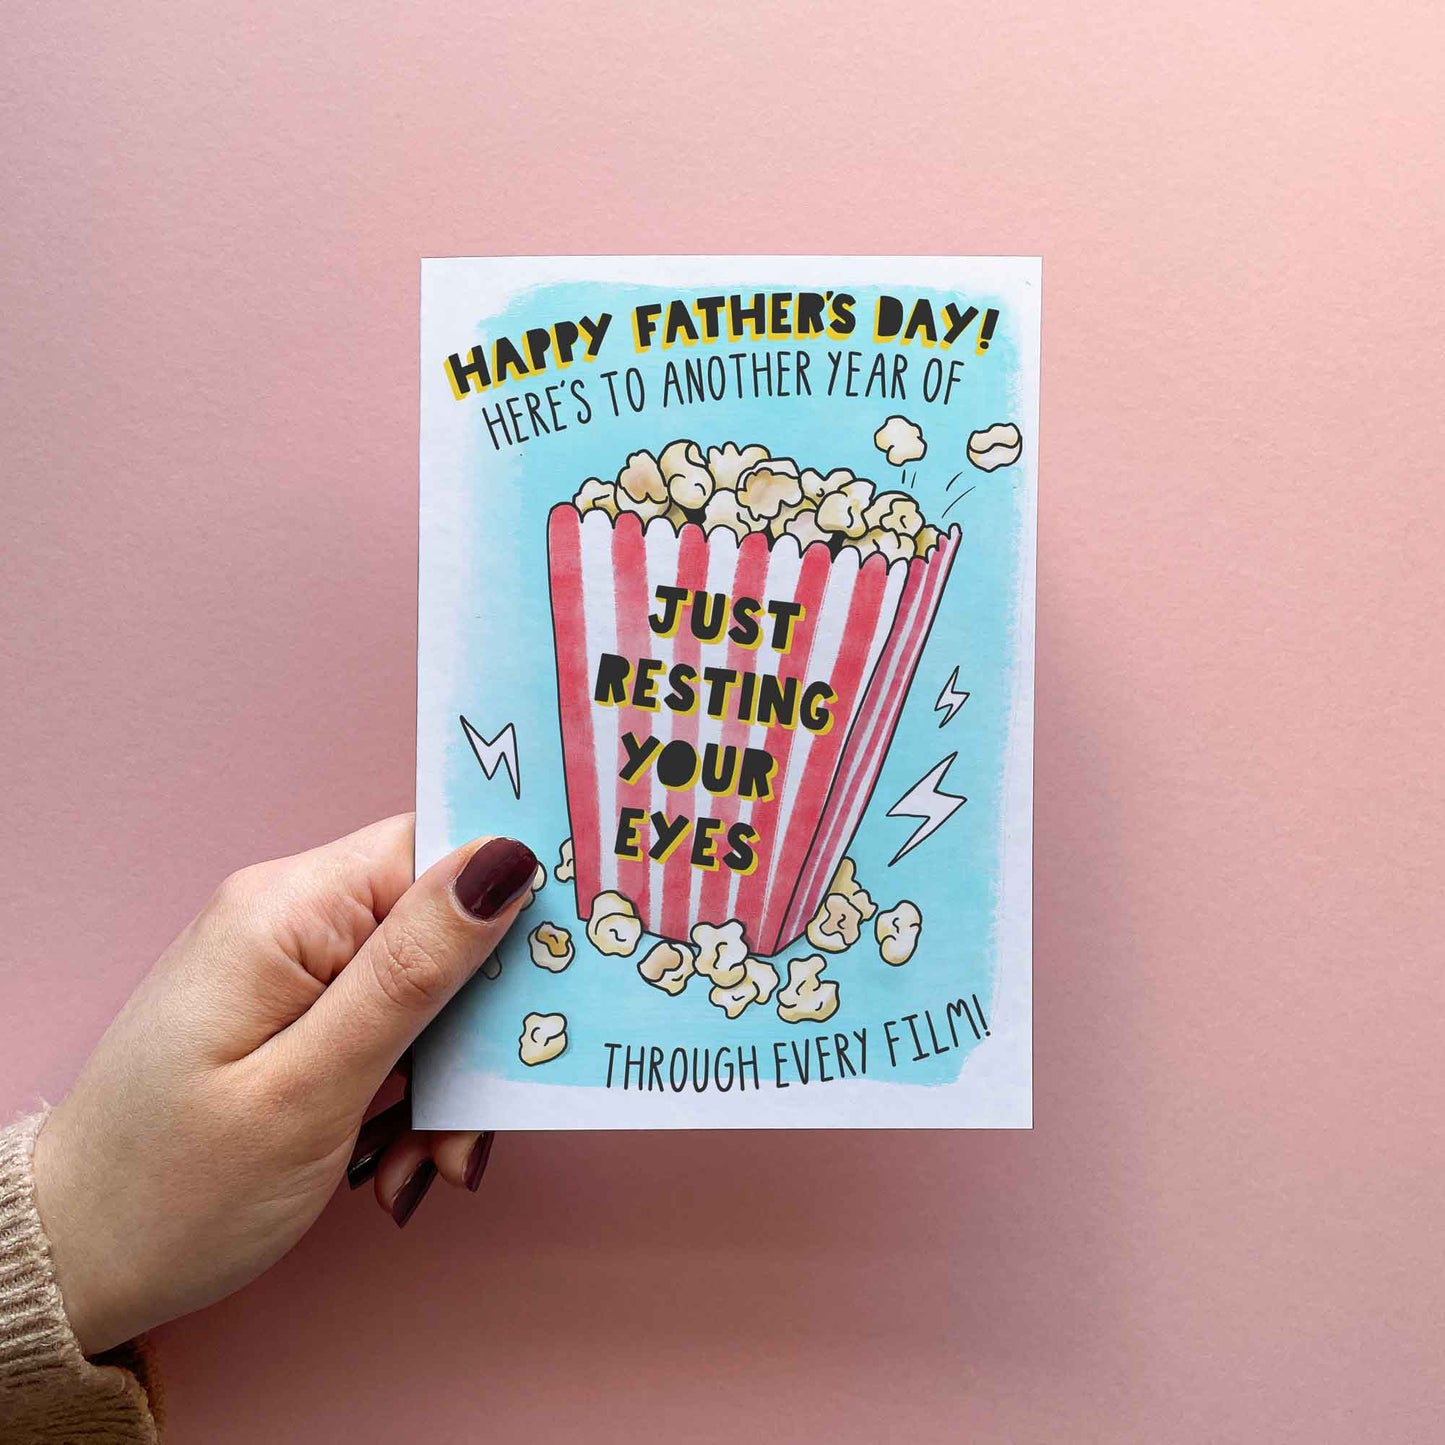 Funny Fathers Day card for Dad, reading: "Happy Fathers Day! Here's to another year of just rising your eyes through every film!" Featuring a popcorn illustration in blue red and yellow.